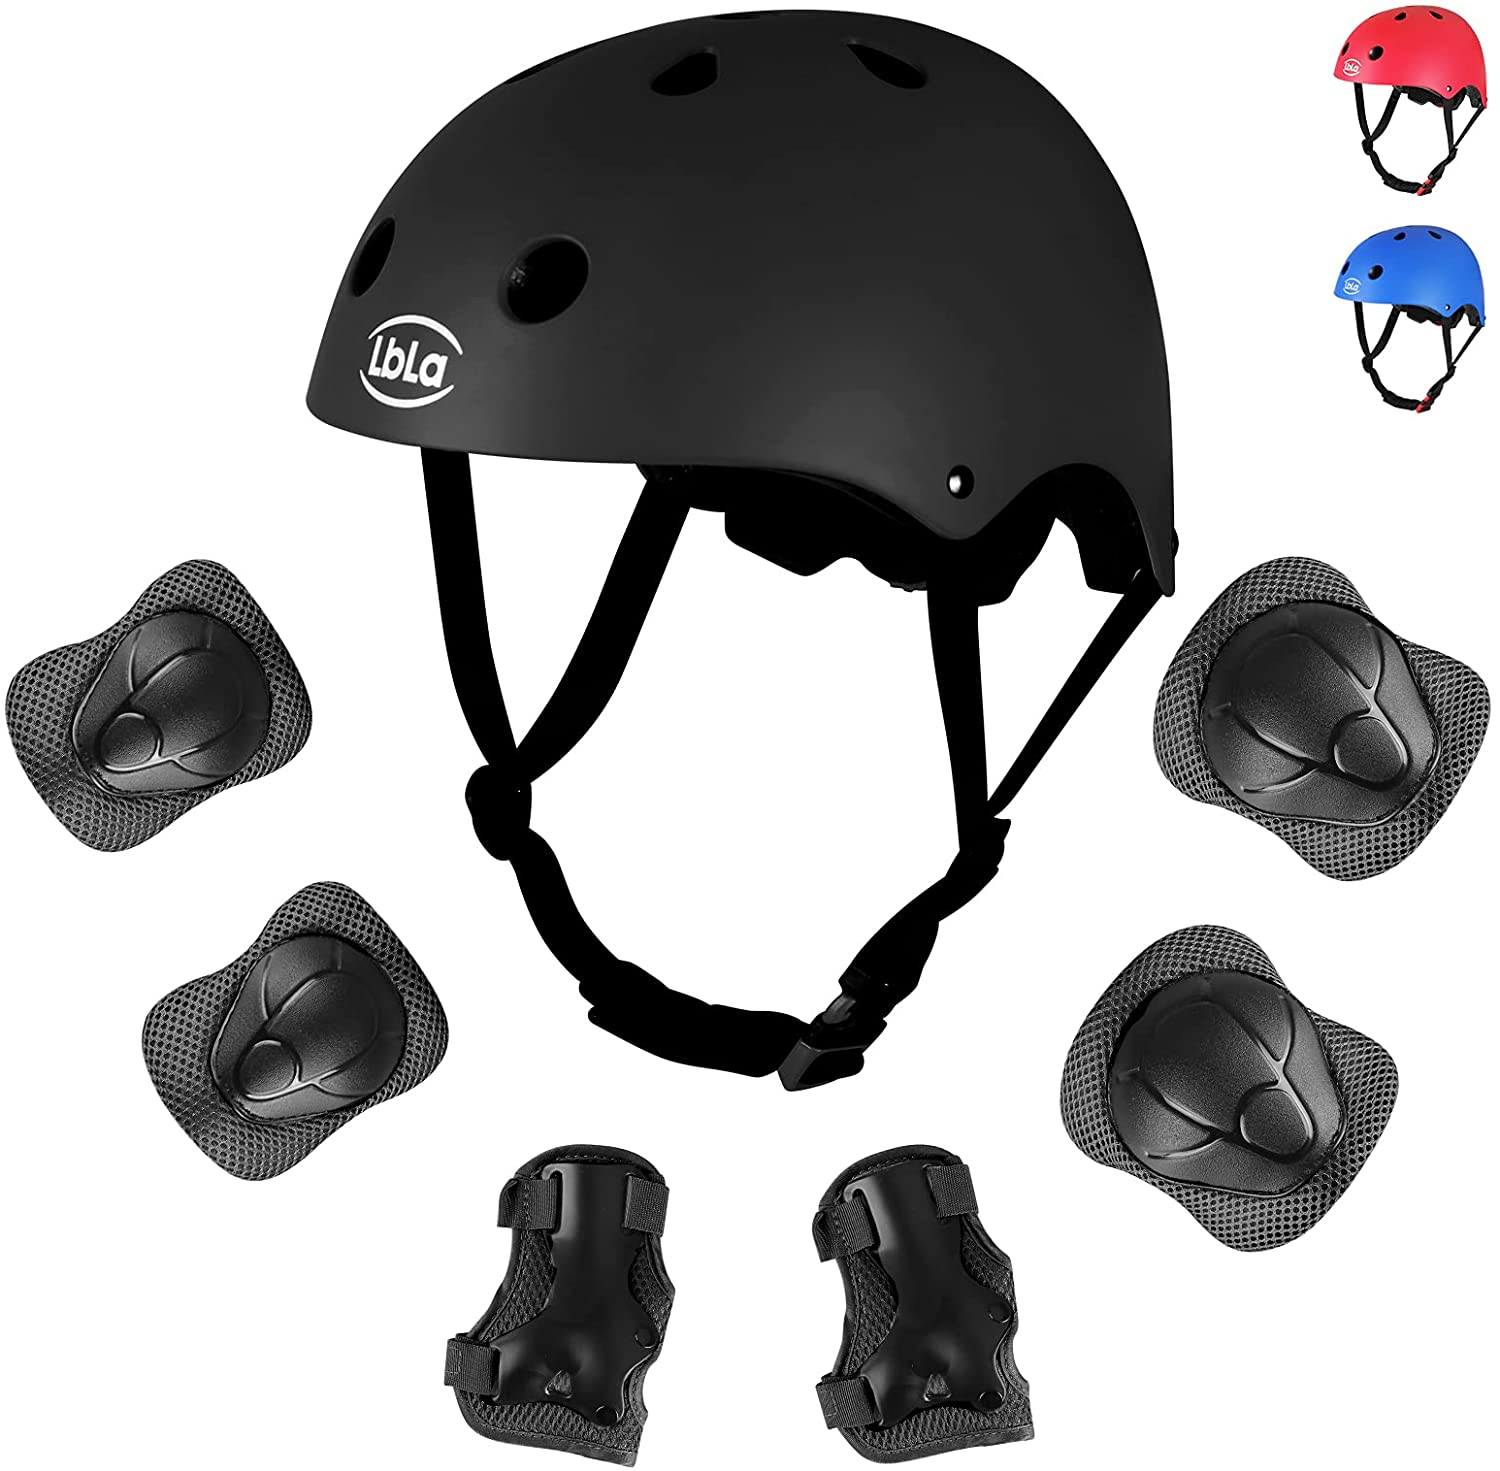 Chinese Professional Baby Scooter - LBLA Kids Bike Skateboard Helmet,Helmet and Pads Protect Head Knee Elbow and Wrist,7 Pcs Adjustable Protective Gear Set for 3-8 Years Kids Boys and Girls –...